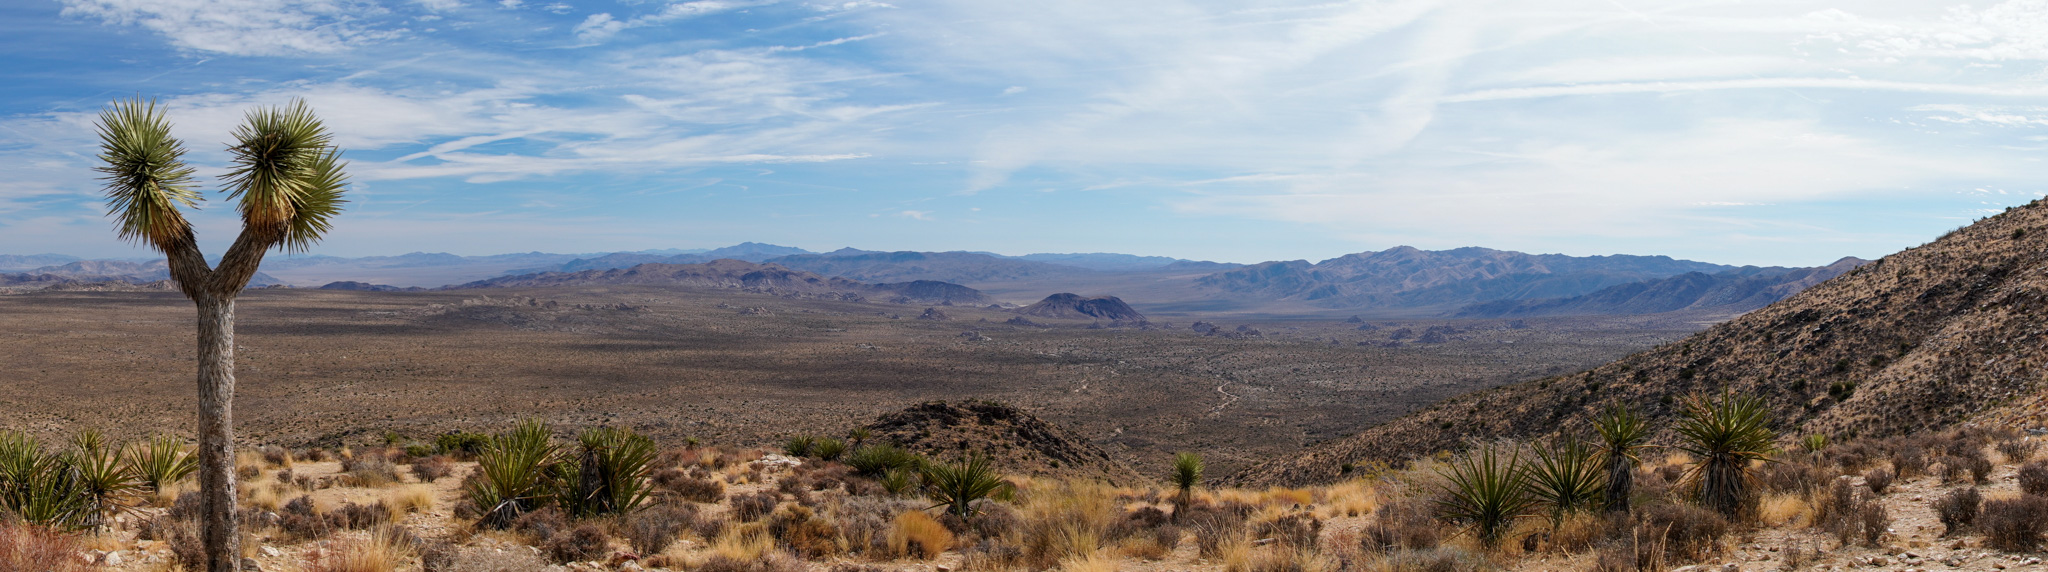 A view down into the Park from a rocky, desert peak, looking at the scabrous valley floor below. The sun beats down on it all. A Joshua tree is in the foreground to the left.